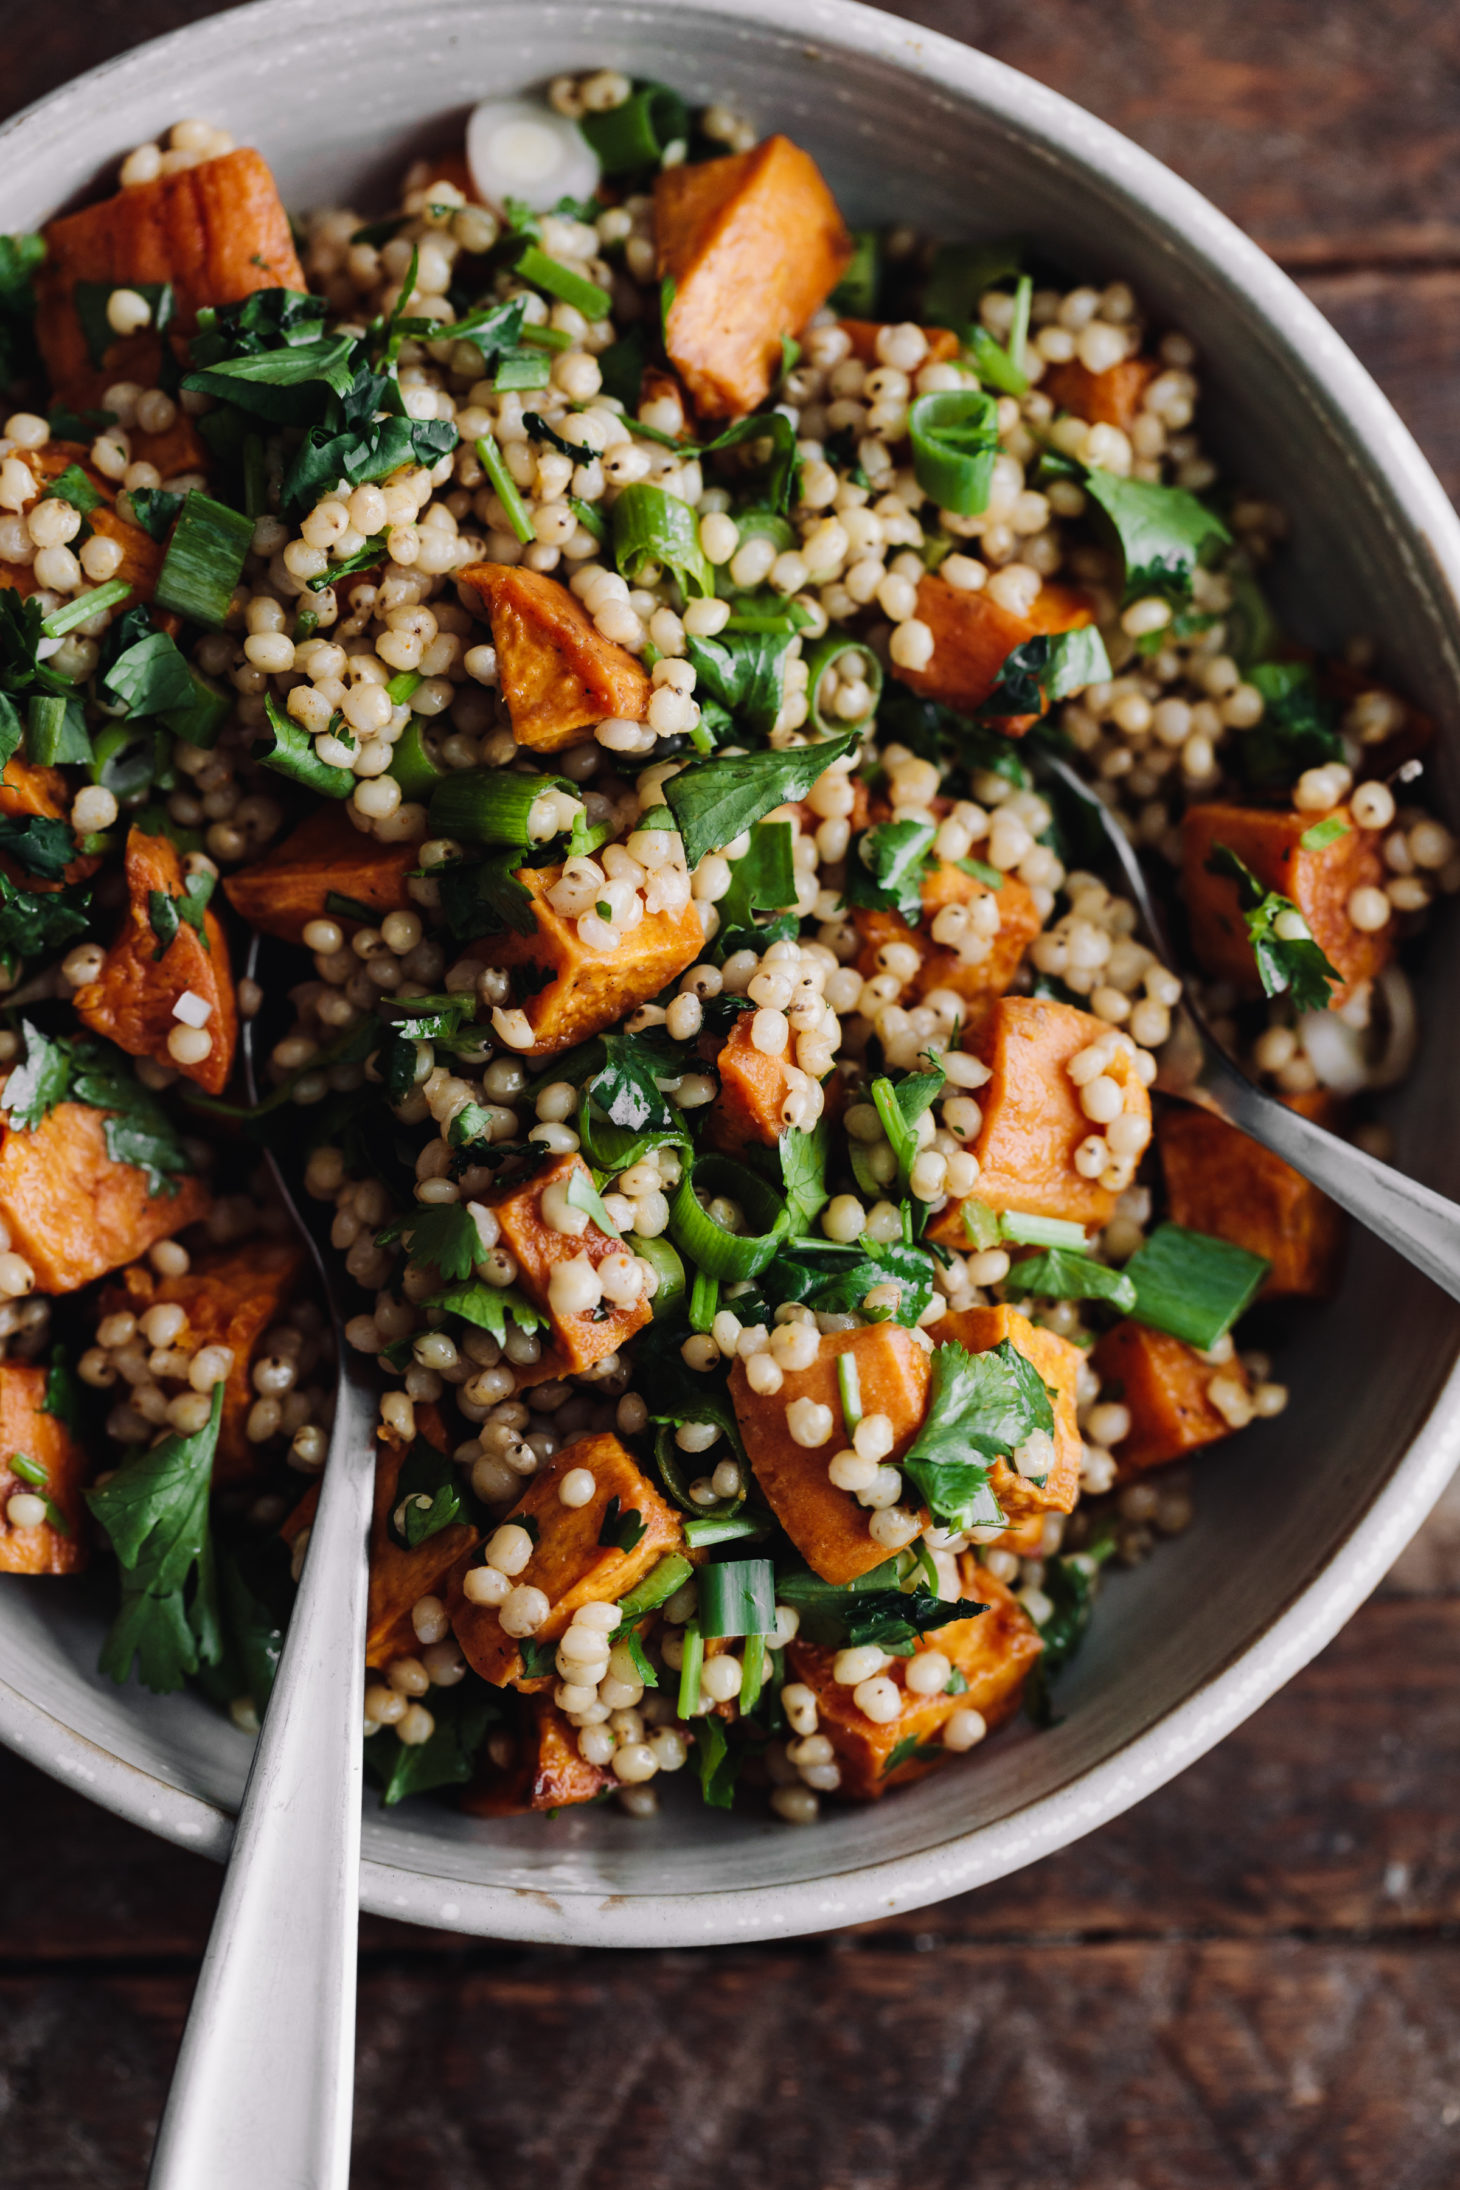 Roasted Chipotle Sweet Potato and Sorghum Salad with Herbs